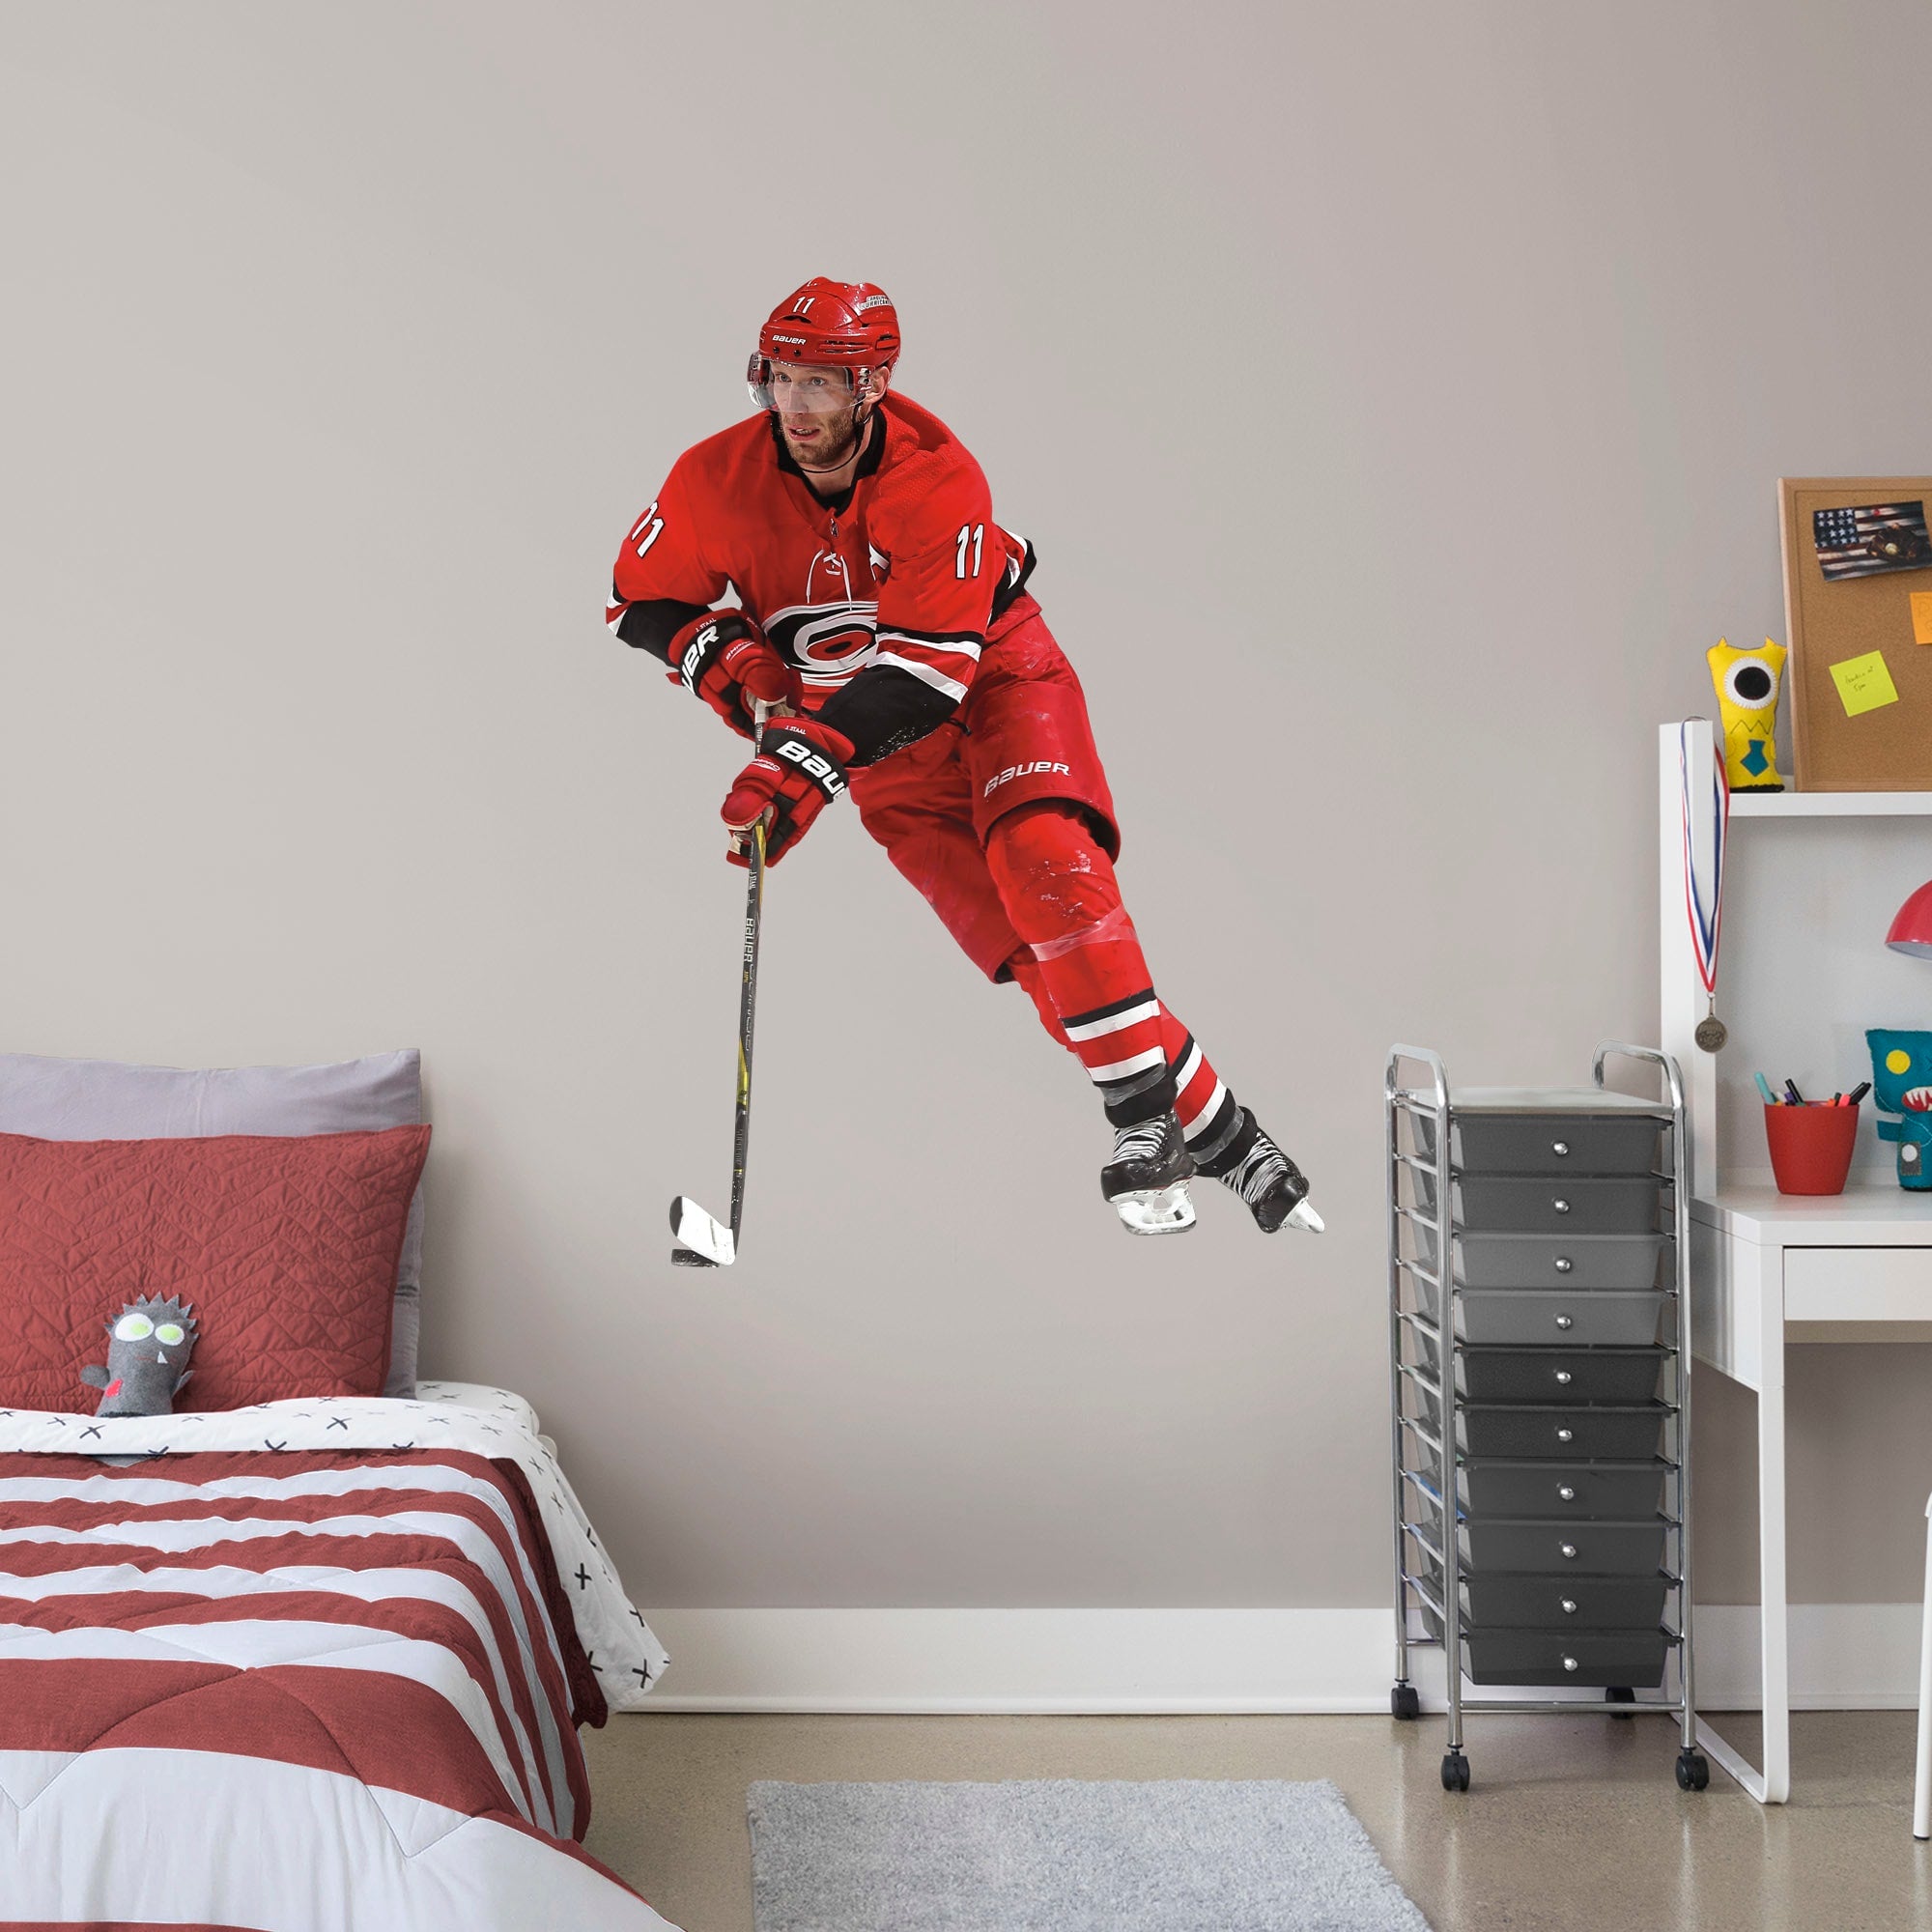 Jordan Staal for Carolina Hurricanes - Officially Licensed NHL Removable Wall Decal Giant Athlete + 2 Decals (37"W x 51"H) by Fa